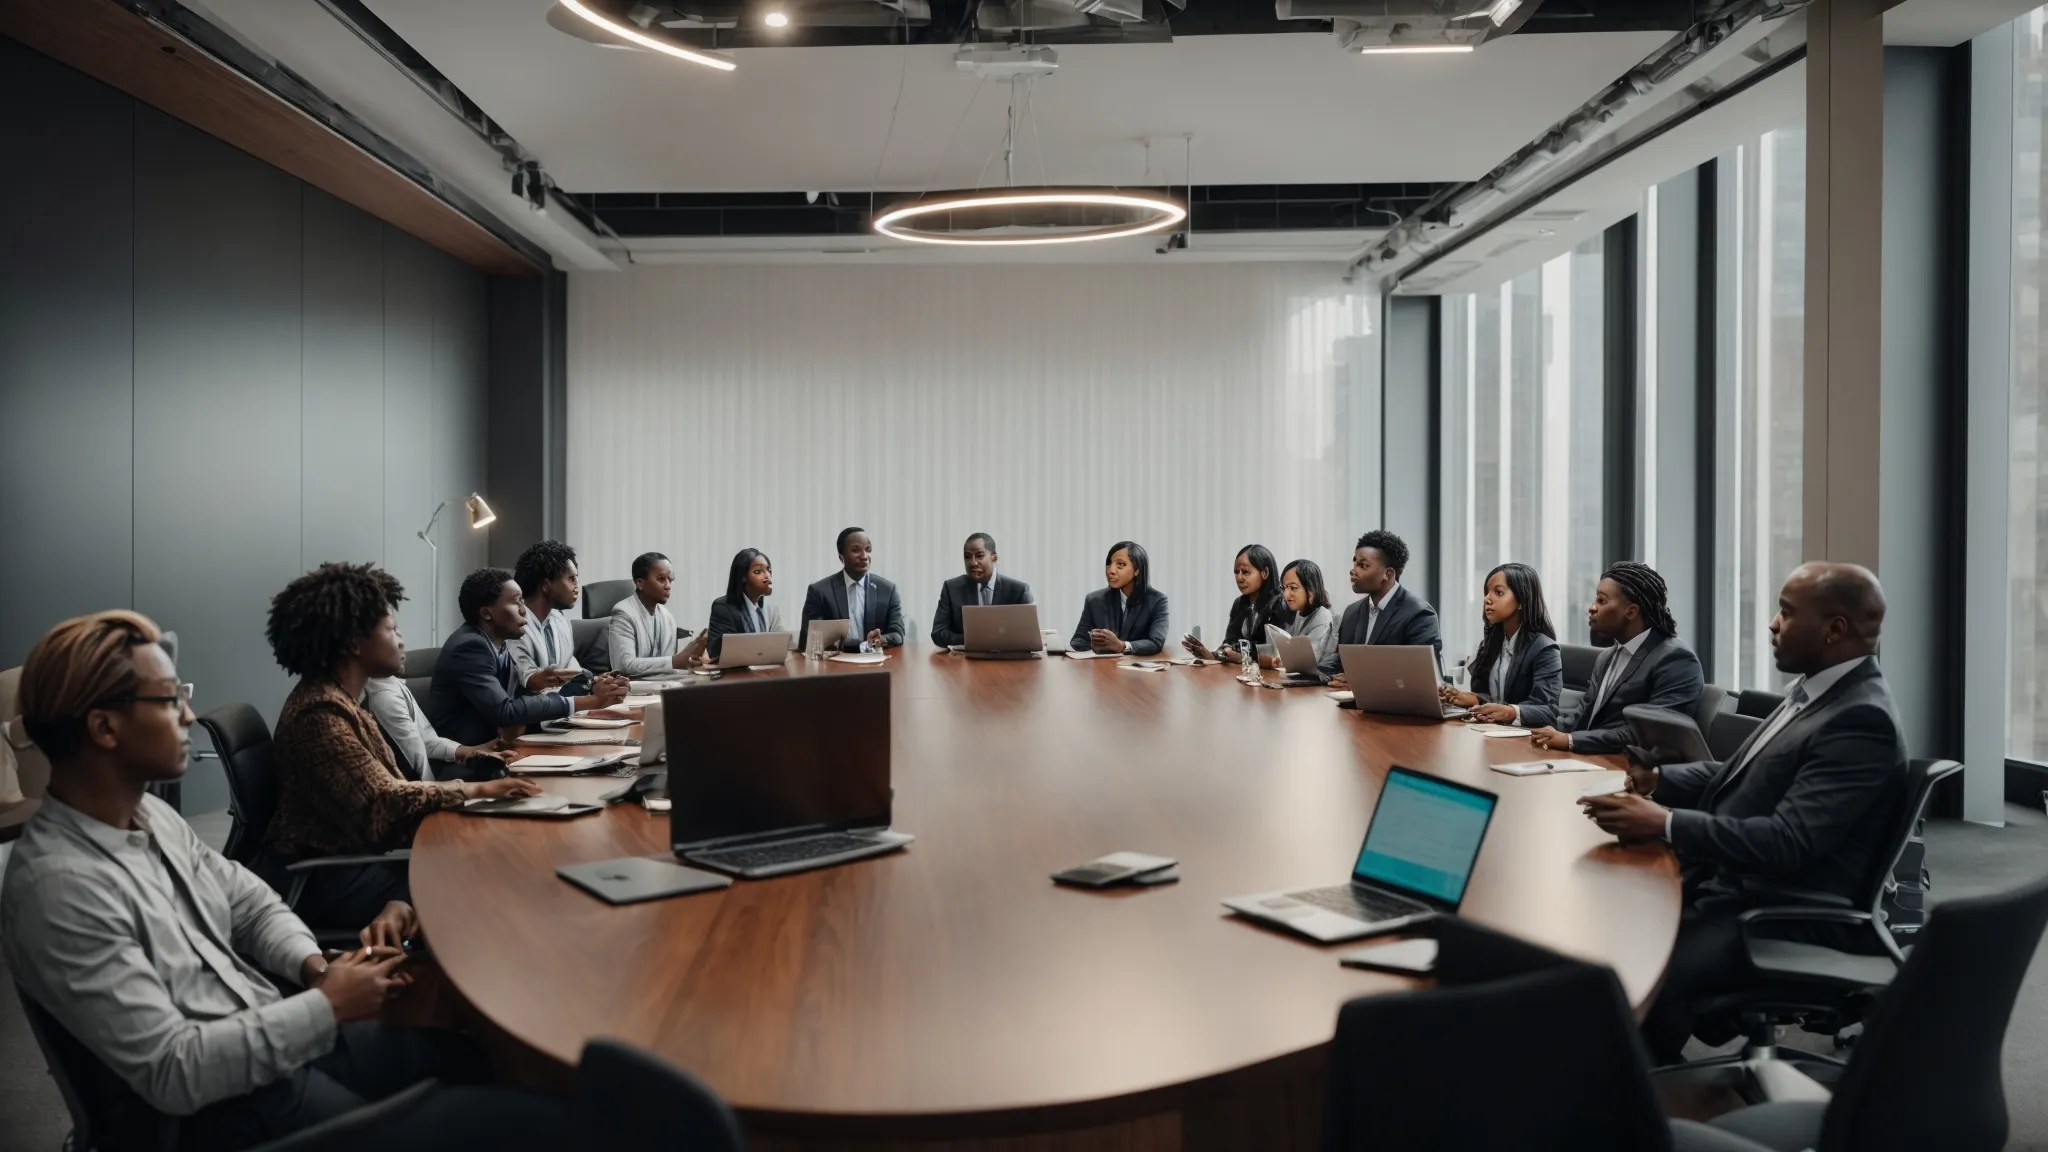 a diverse group of people engaging in a productive discussion around a large conference table equipped with multiple laptops and digital devices.